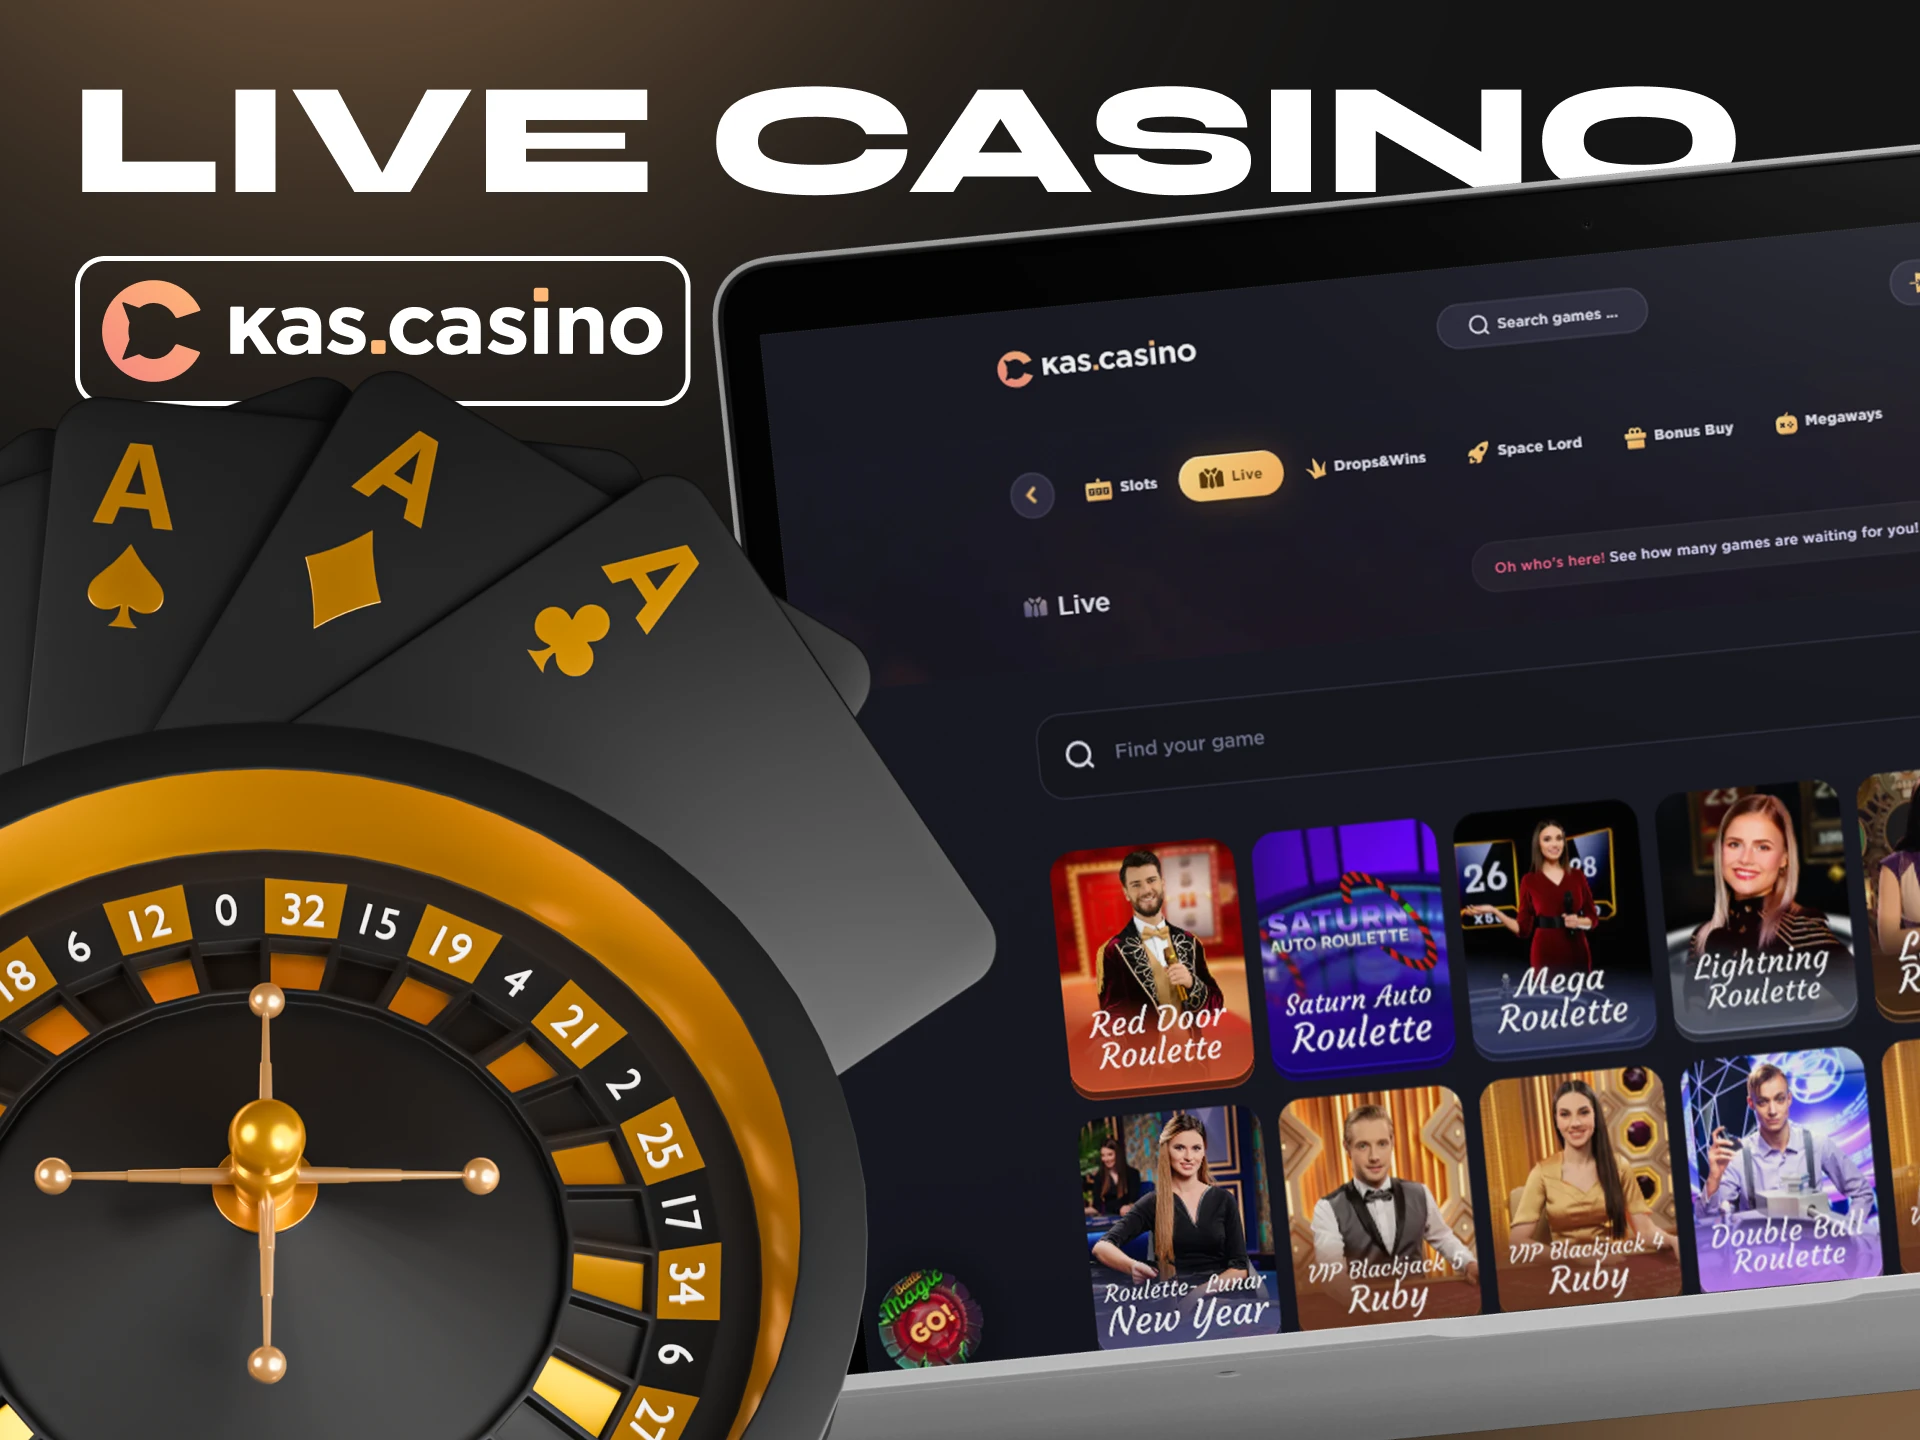 Kas Casino has a large Live Casino games section.